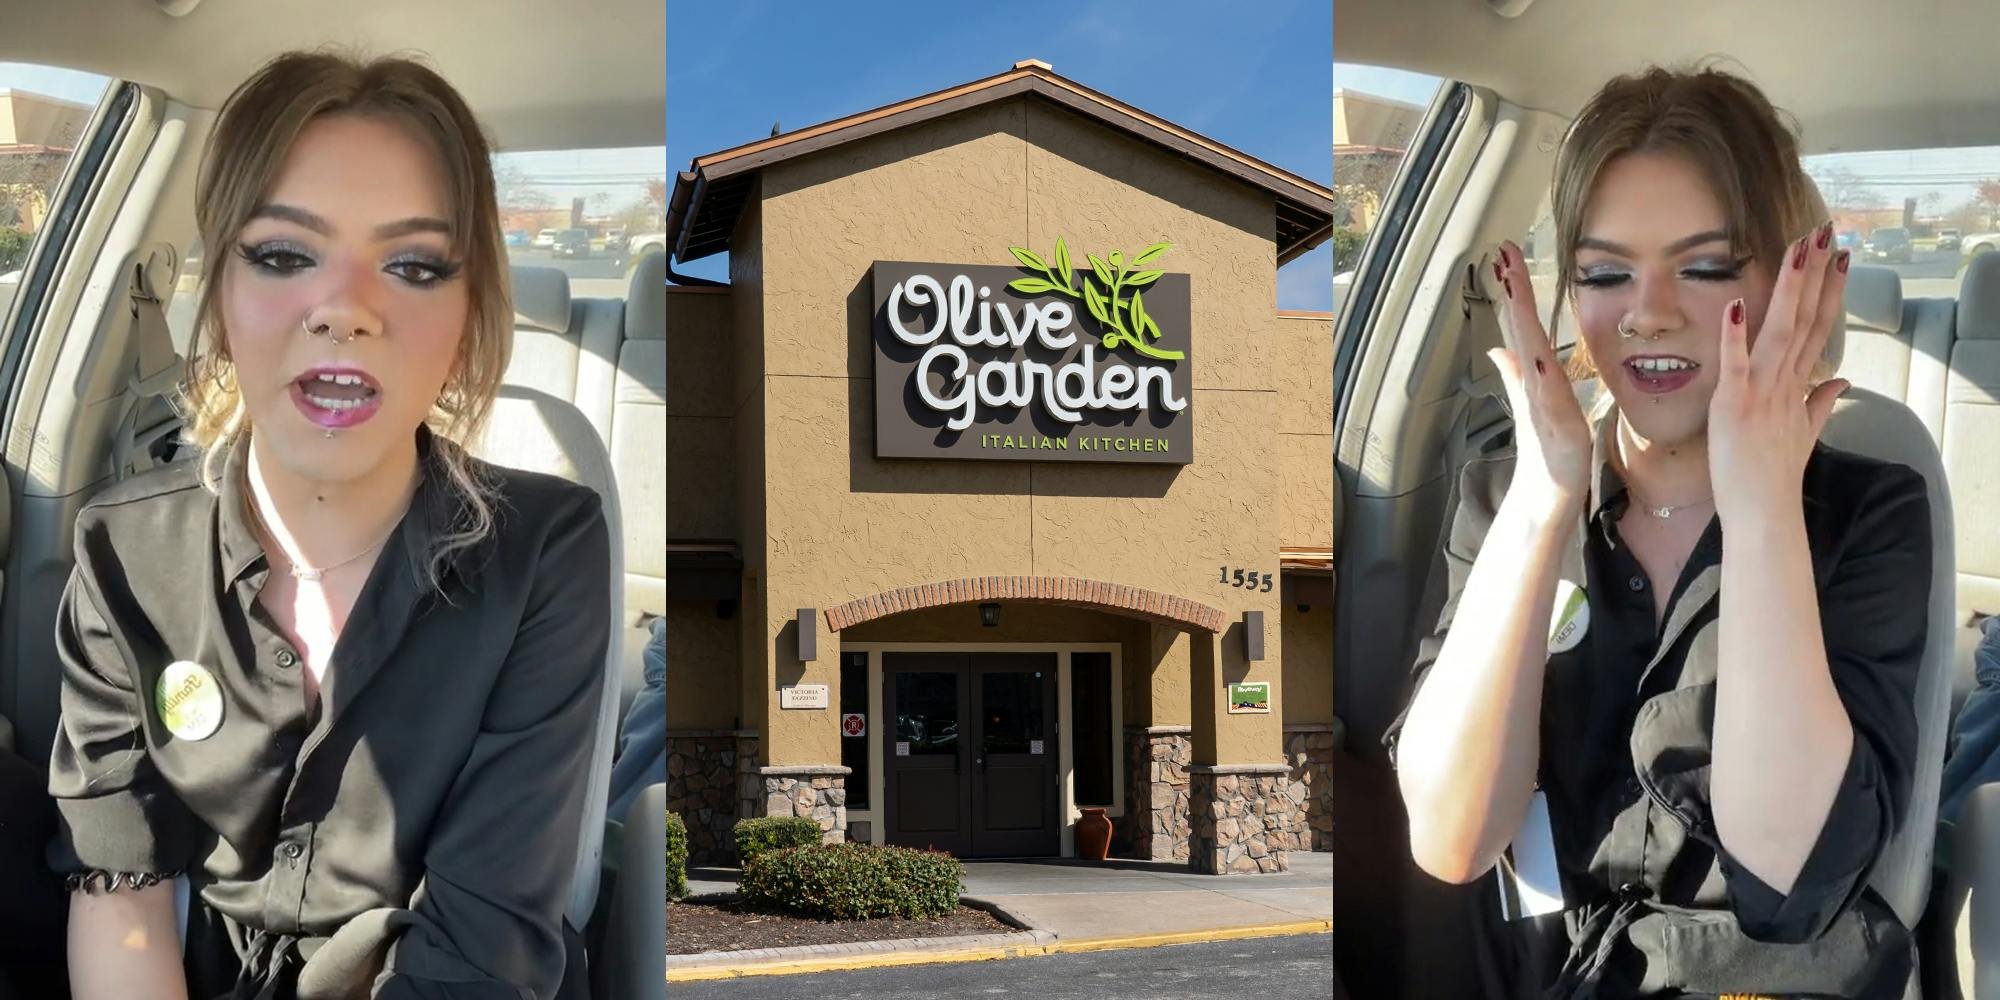 'I saw a server with white socks and my appetite went away': Olive Garden worker says she got sent home for wearing white socks